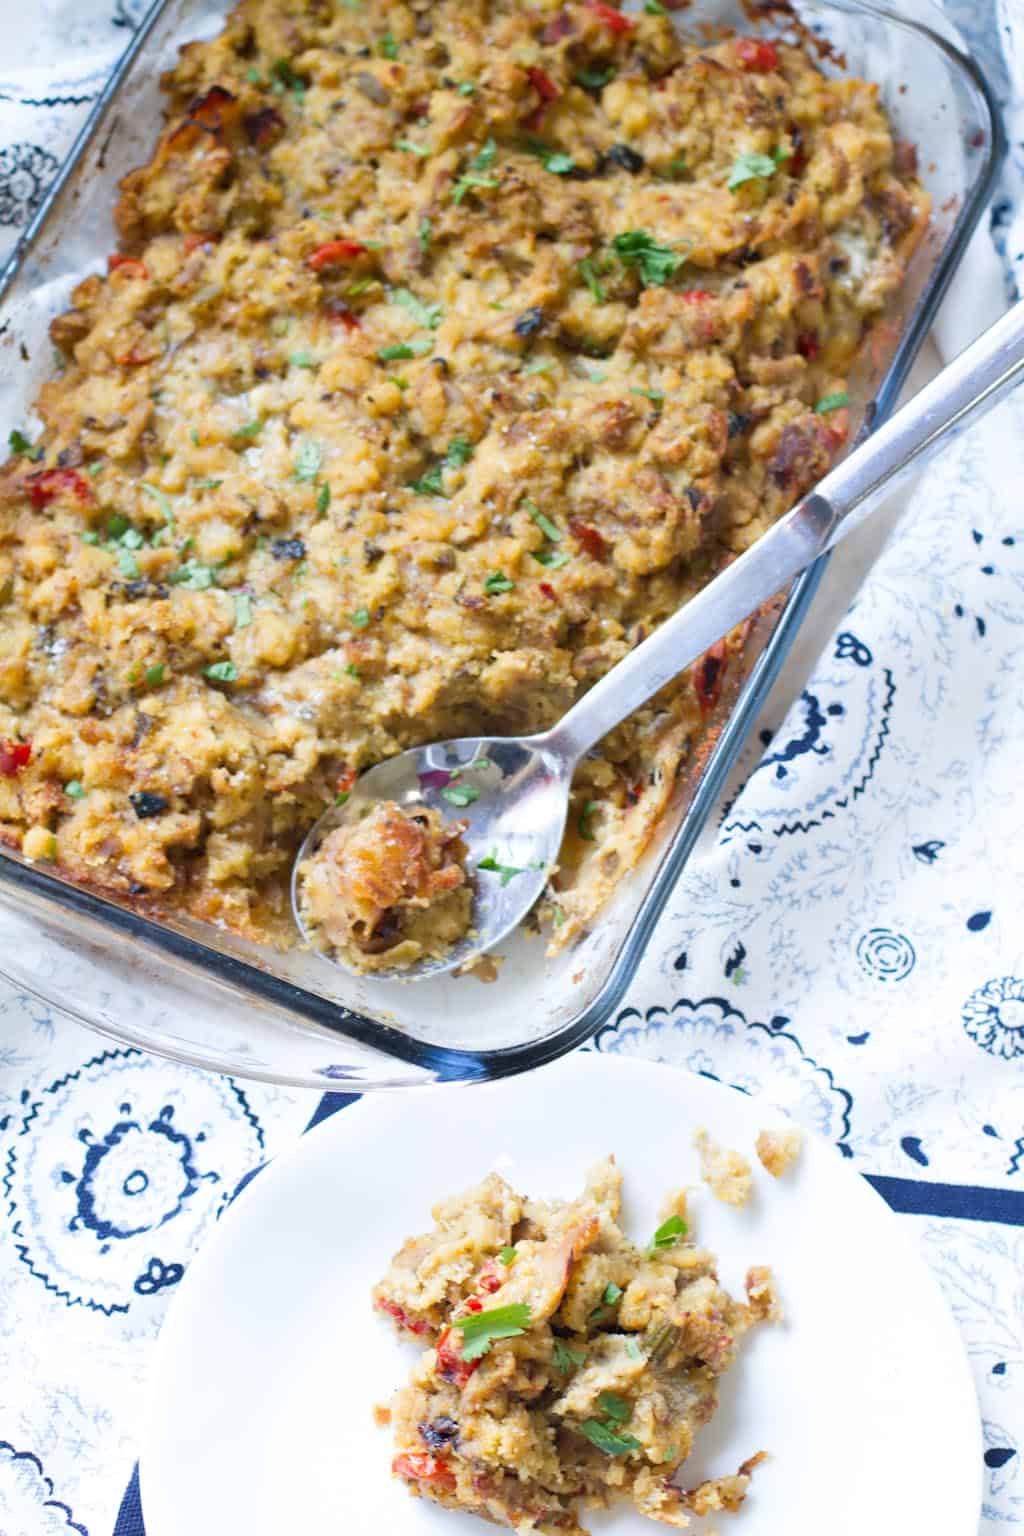 Home-style Turkey Dressing - Moist turkey dressing matched with the perfect blend of cornbread, bread crumbs and savory veggies makes this dish the perfect Thanksgiving side dish.